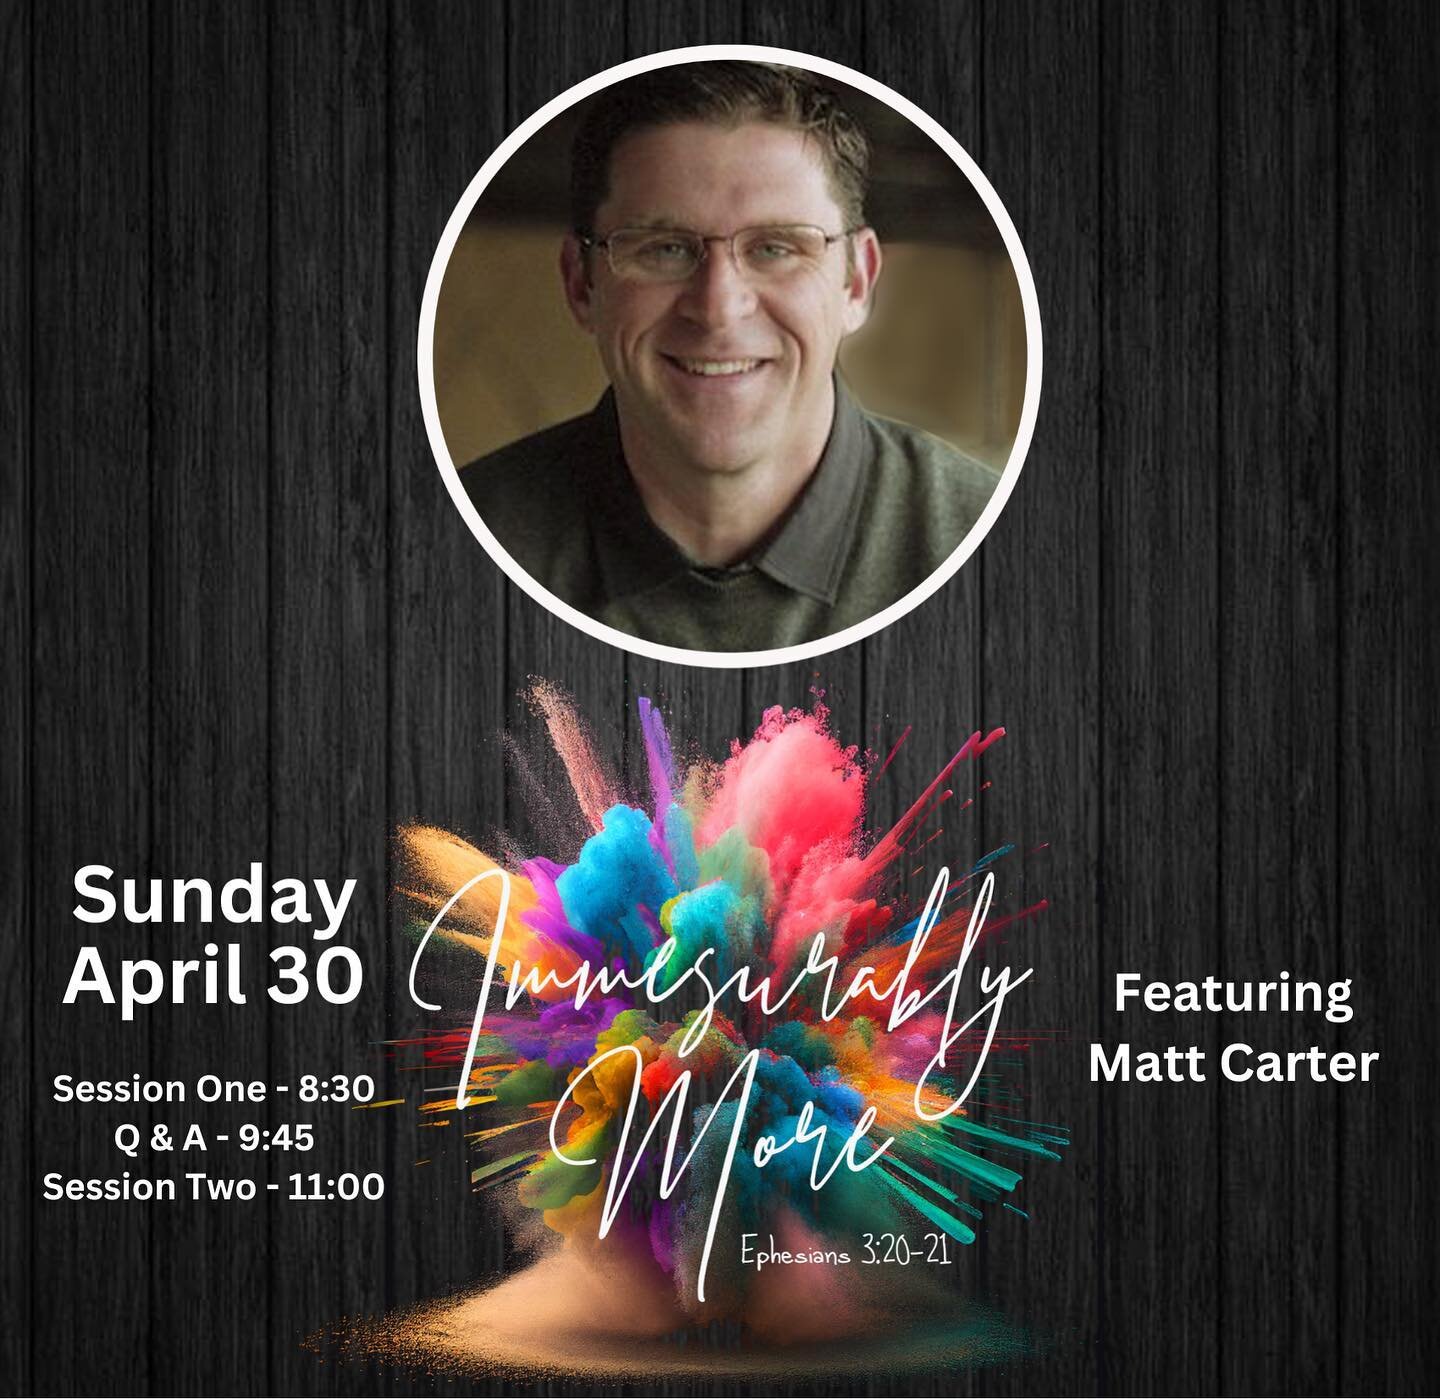 Special Guest this Sunday! Matt grew up at FBC Athens. He is now vice president of mobilization for Send Network, the largest church planting network in North America.
He founded The Austin Stone Community Church in Austin, TX. It grew to over 8,000 